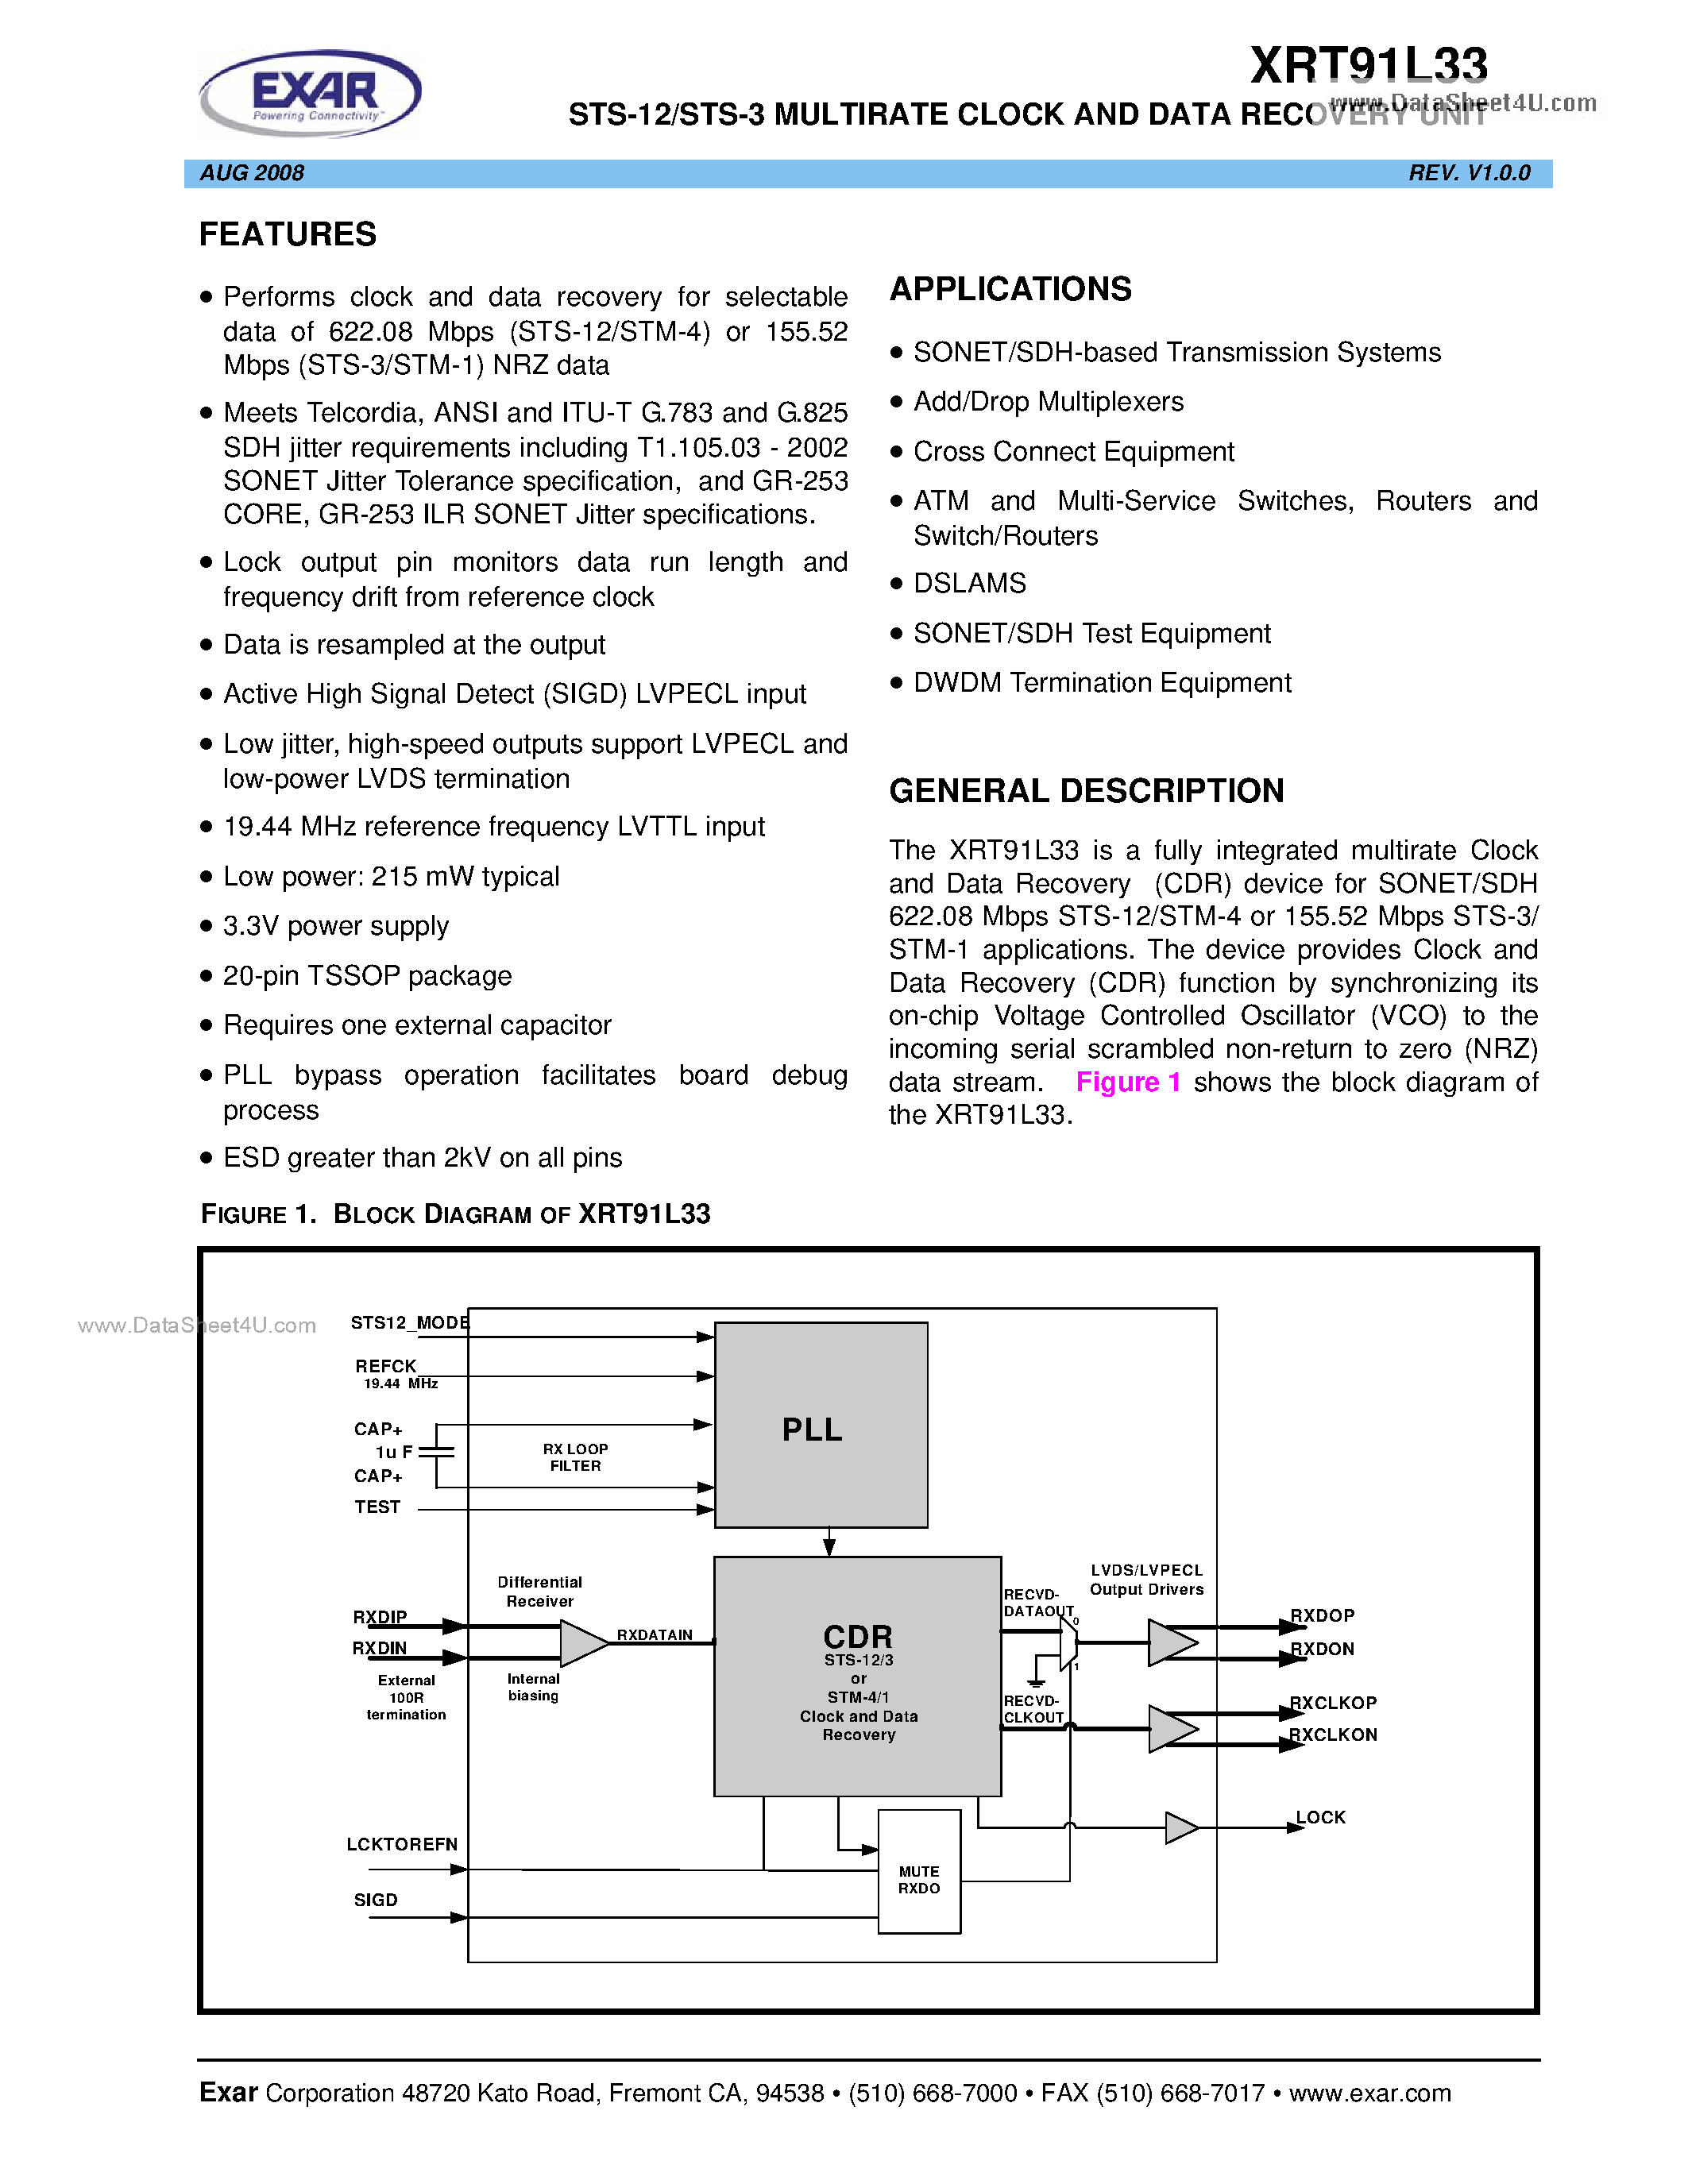 Datasheet XRT91L33 - STS-12/STS-3 MULTIRATE CLOCK AND DATA RECOVERY UNIT page 1